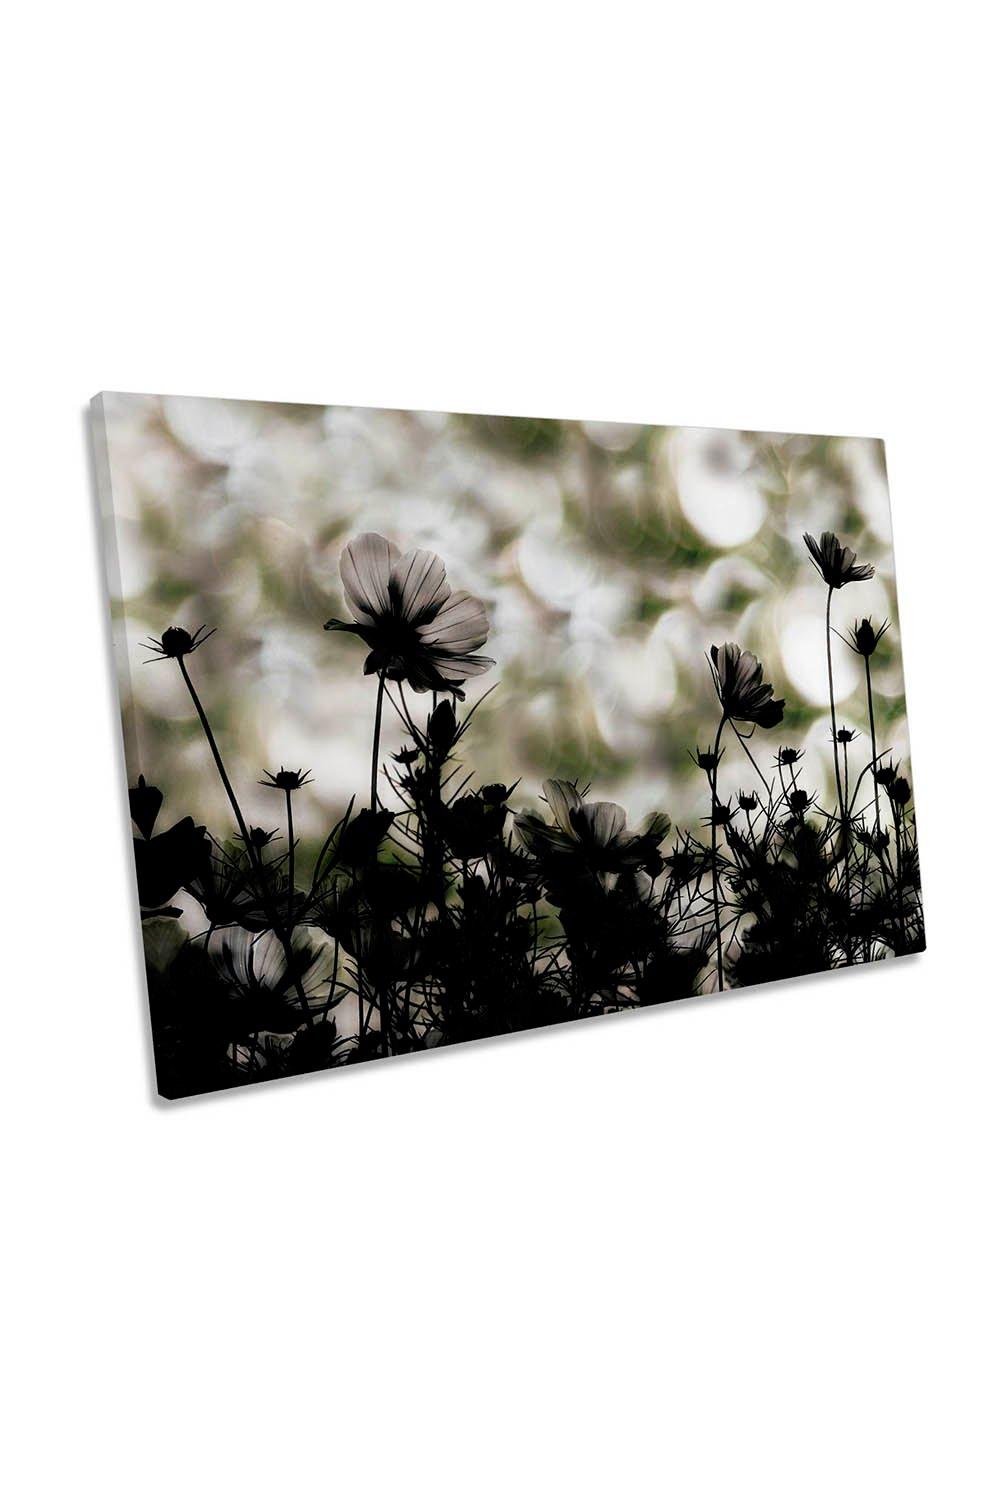 Autumn Chorus Meadow Flowers Canvas Wall Art Picture Print